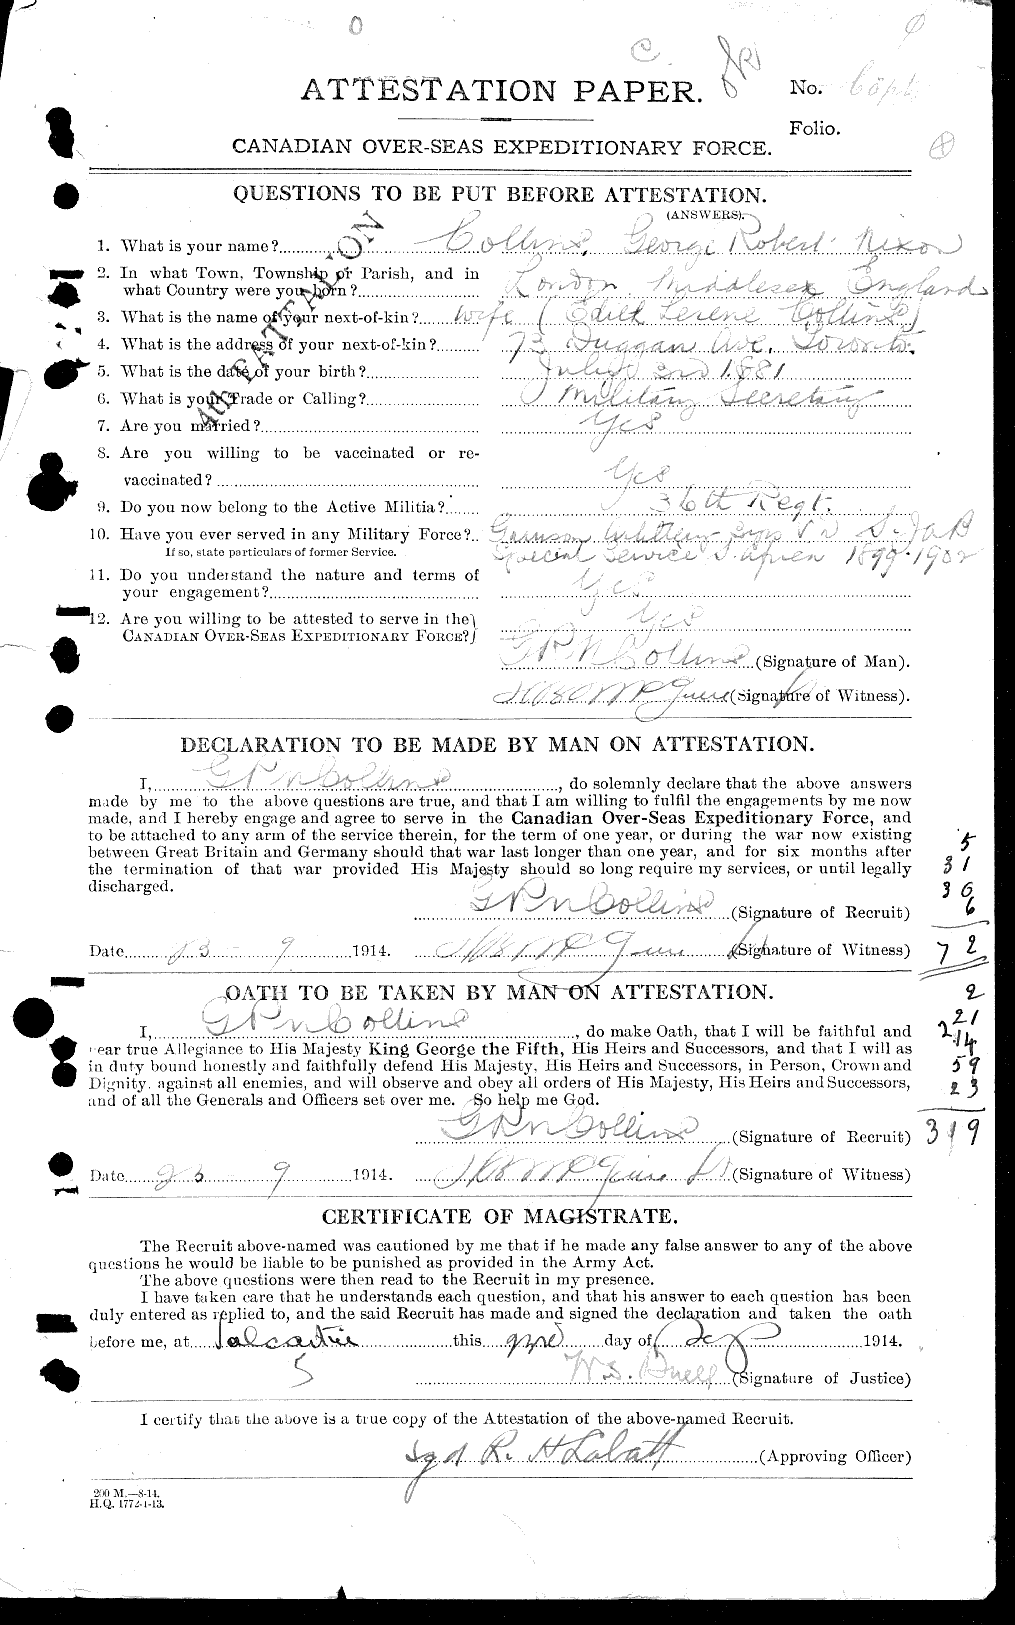 Personnel Records of the First World War - CEF 037876a